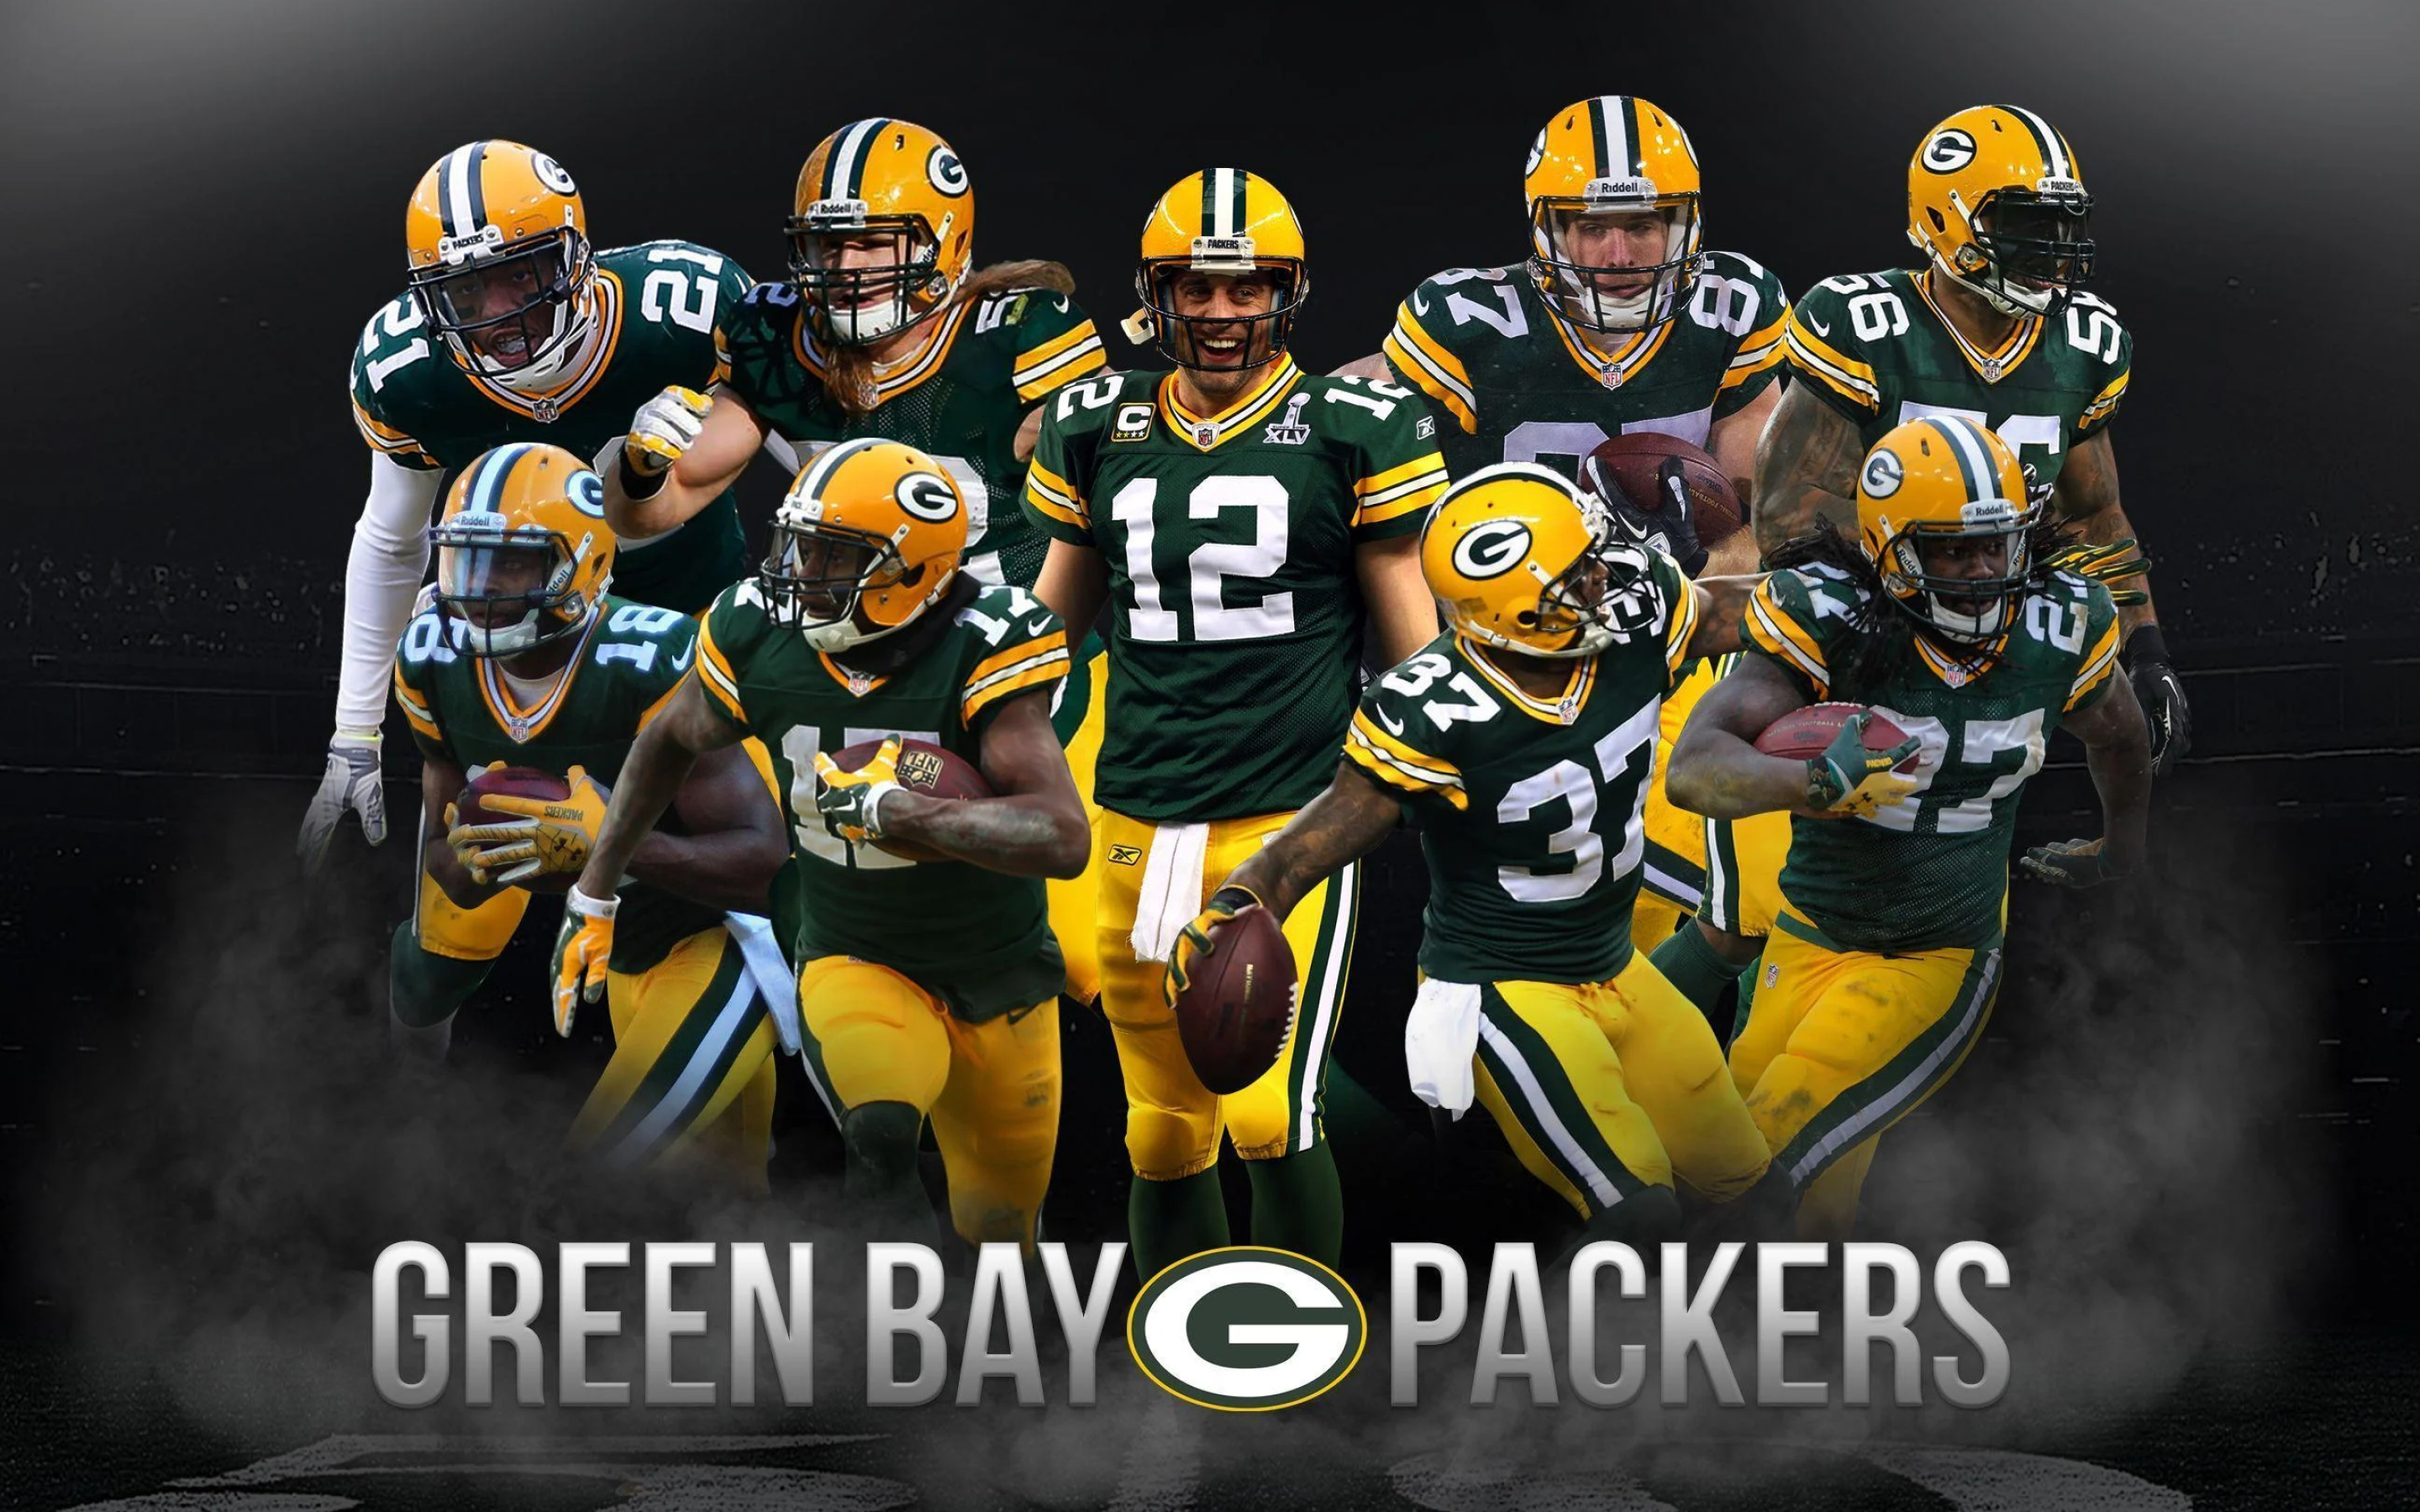 2880x1800 Free download Green Bay Packers Wallpapers [] for your Desktop, Mobile \u0026 Tablet | Explore 97+ Green Bay Packers 2018 Wallpapers | Green Bay Packers 2018 Wallpapers, Green Bay Packers Wallpaper, Green Bay Packers Wallpapers